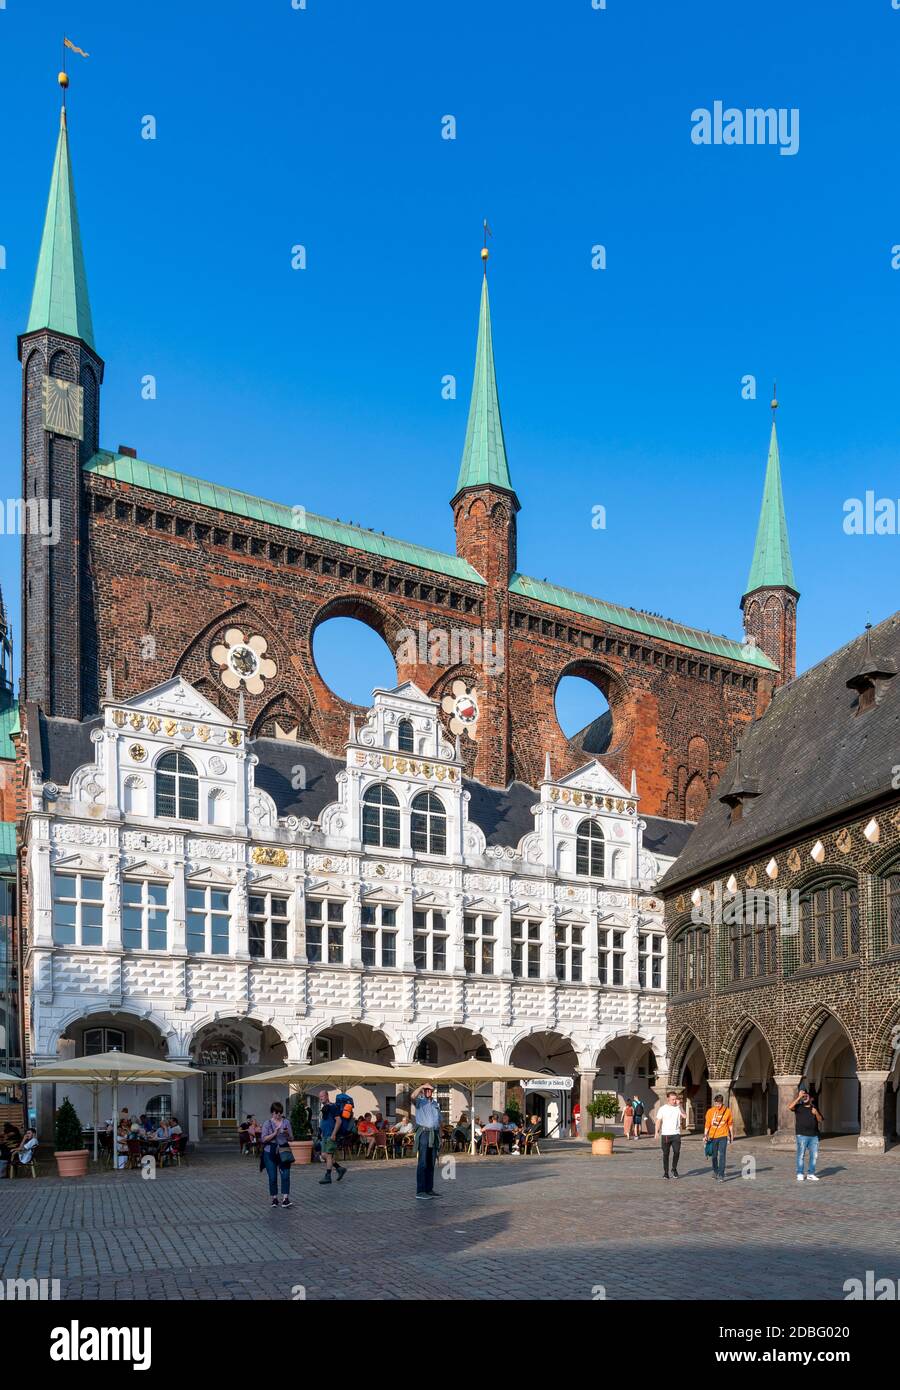 Stadtverwaltung Hansestadt Lübeck. This 1226 town hall has ornate arched buildings, in styles from Gothic to Renaissance - plus wind holes too! Stock Photo